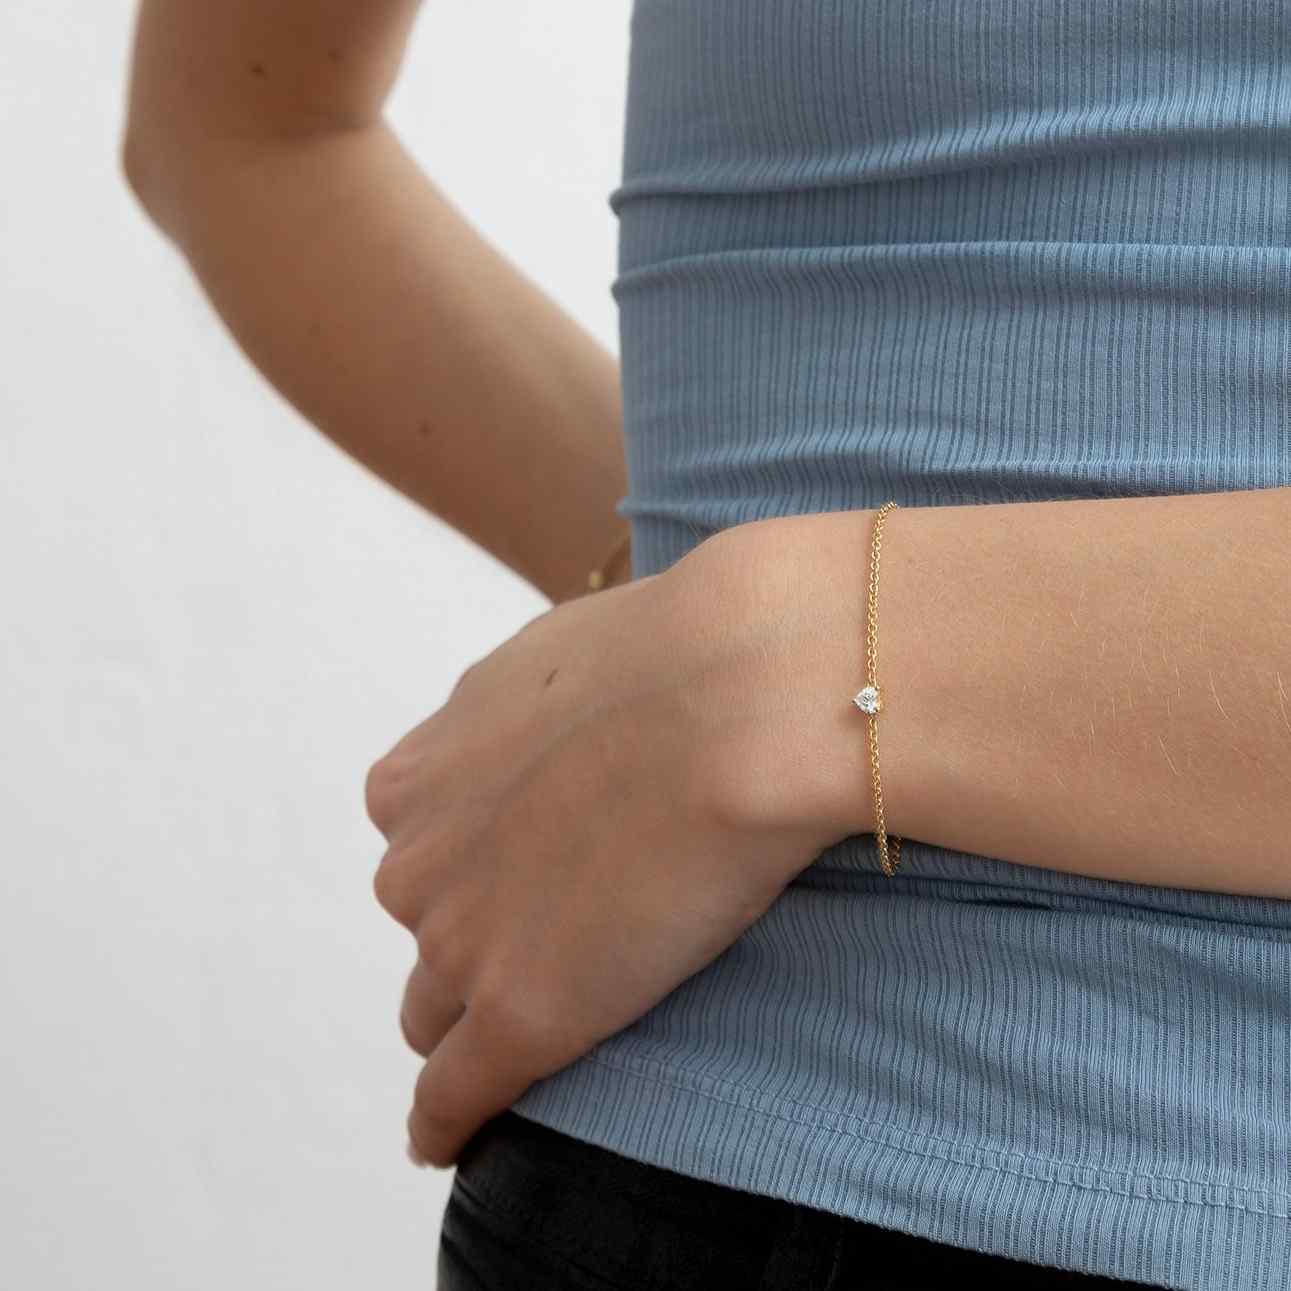 A model wears the Coup de Cœur bracelet on an 18K gold chain. The bracelet features a brilliant heart diamond in the center of the gold chain. This diamond bracelet can be adjusted to two different lengths, 6.3" (16 cm) and 6.7" (17 cm).